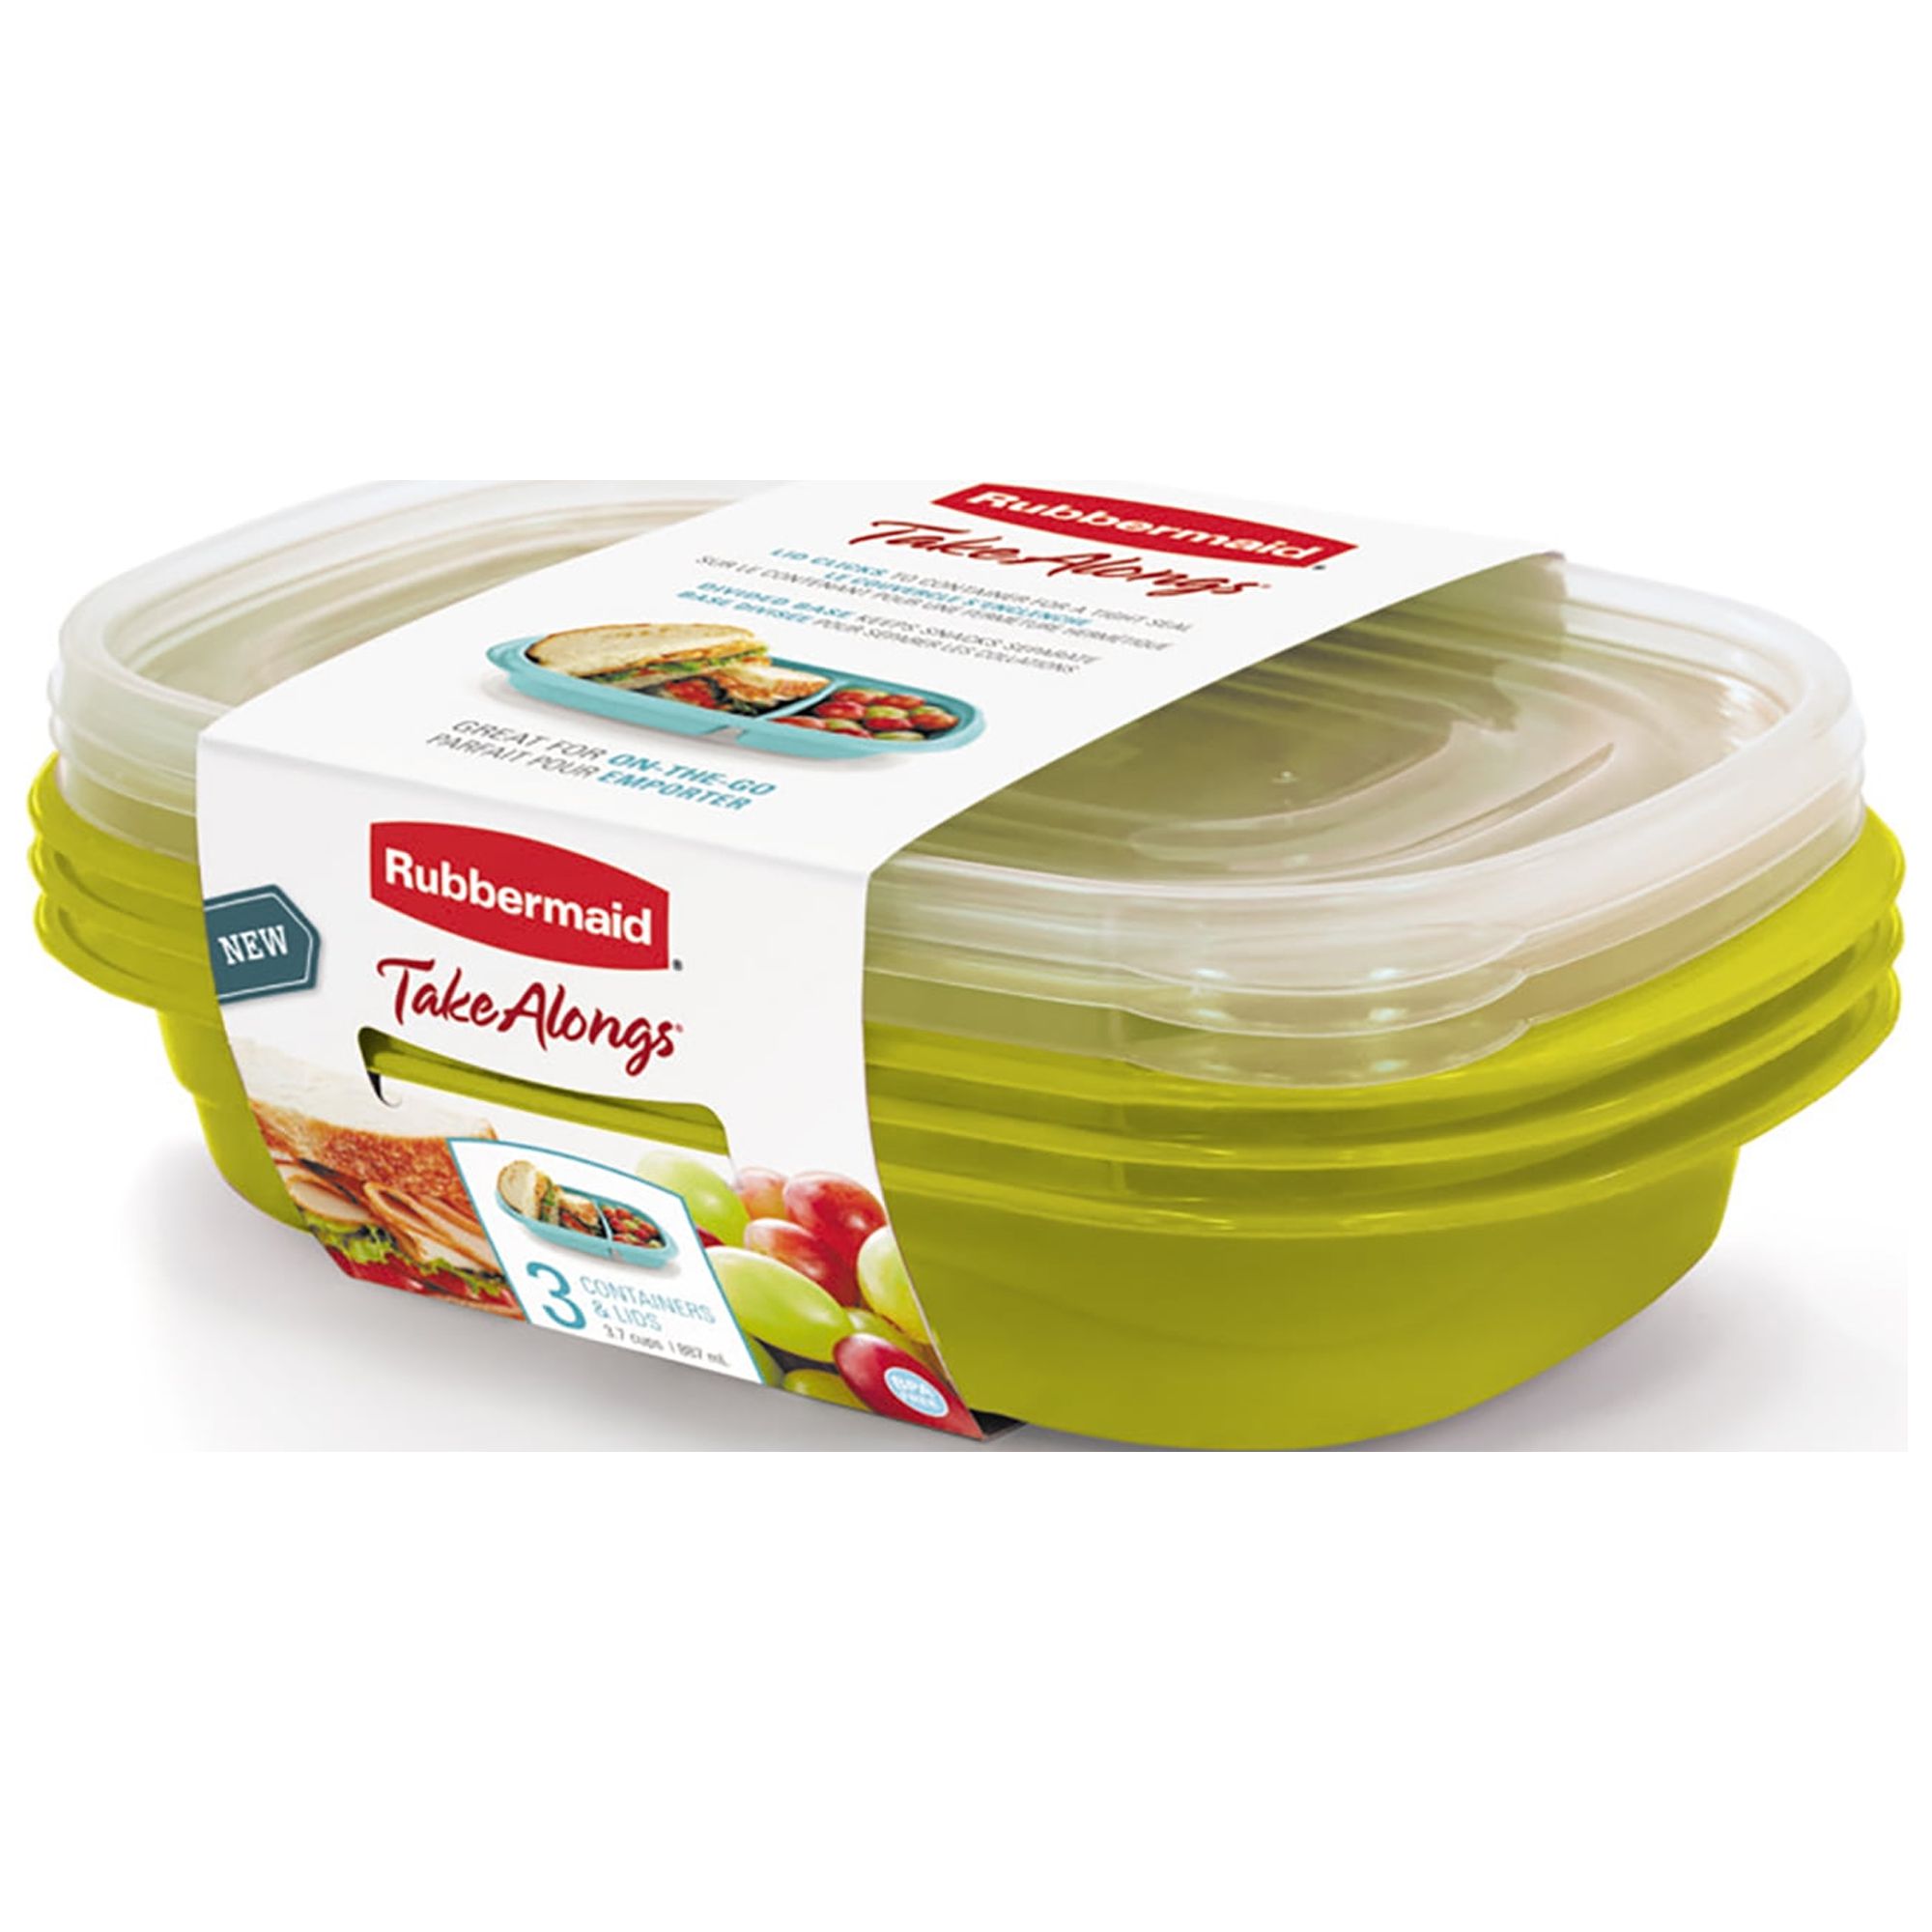 Rubbermaid TakeAlongs 3.7 Cup Divided Food Storage Containers, Set of 3, color may vary - image 2 of 4